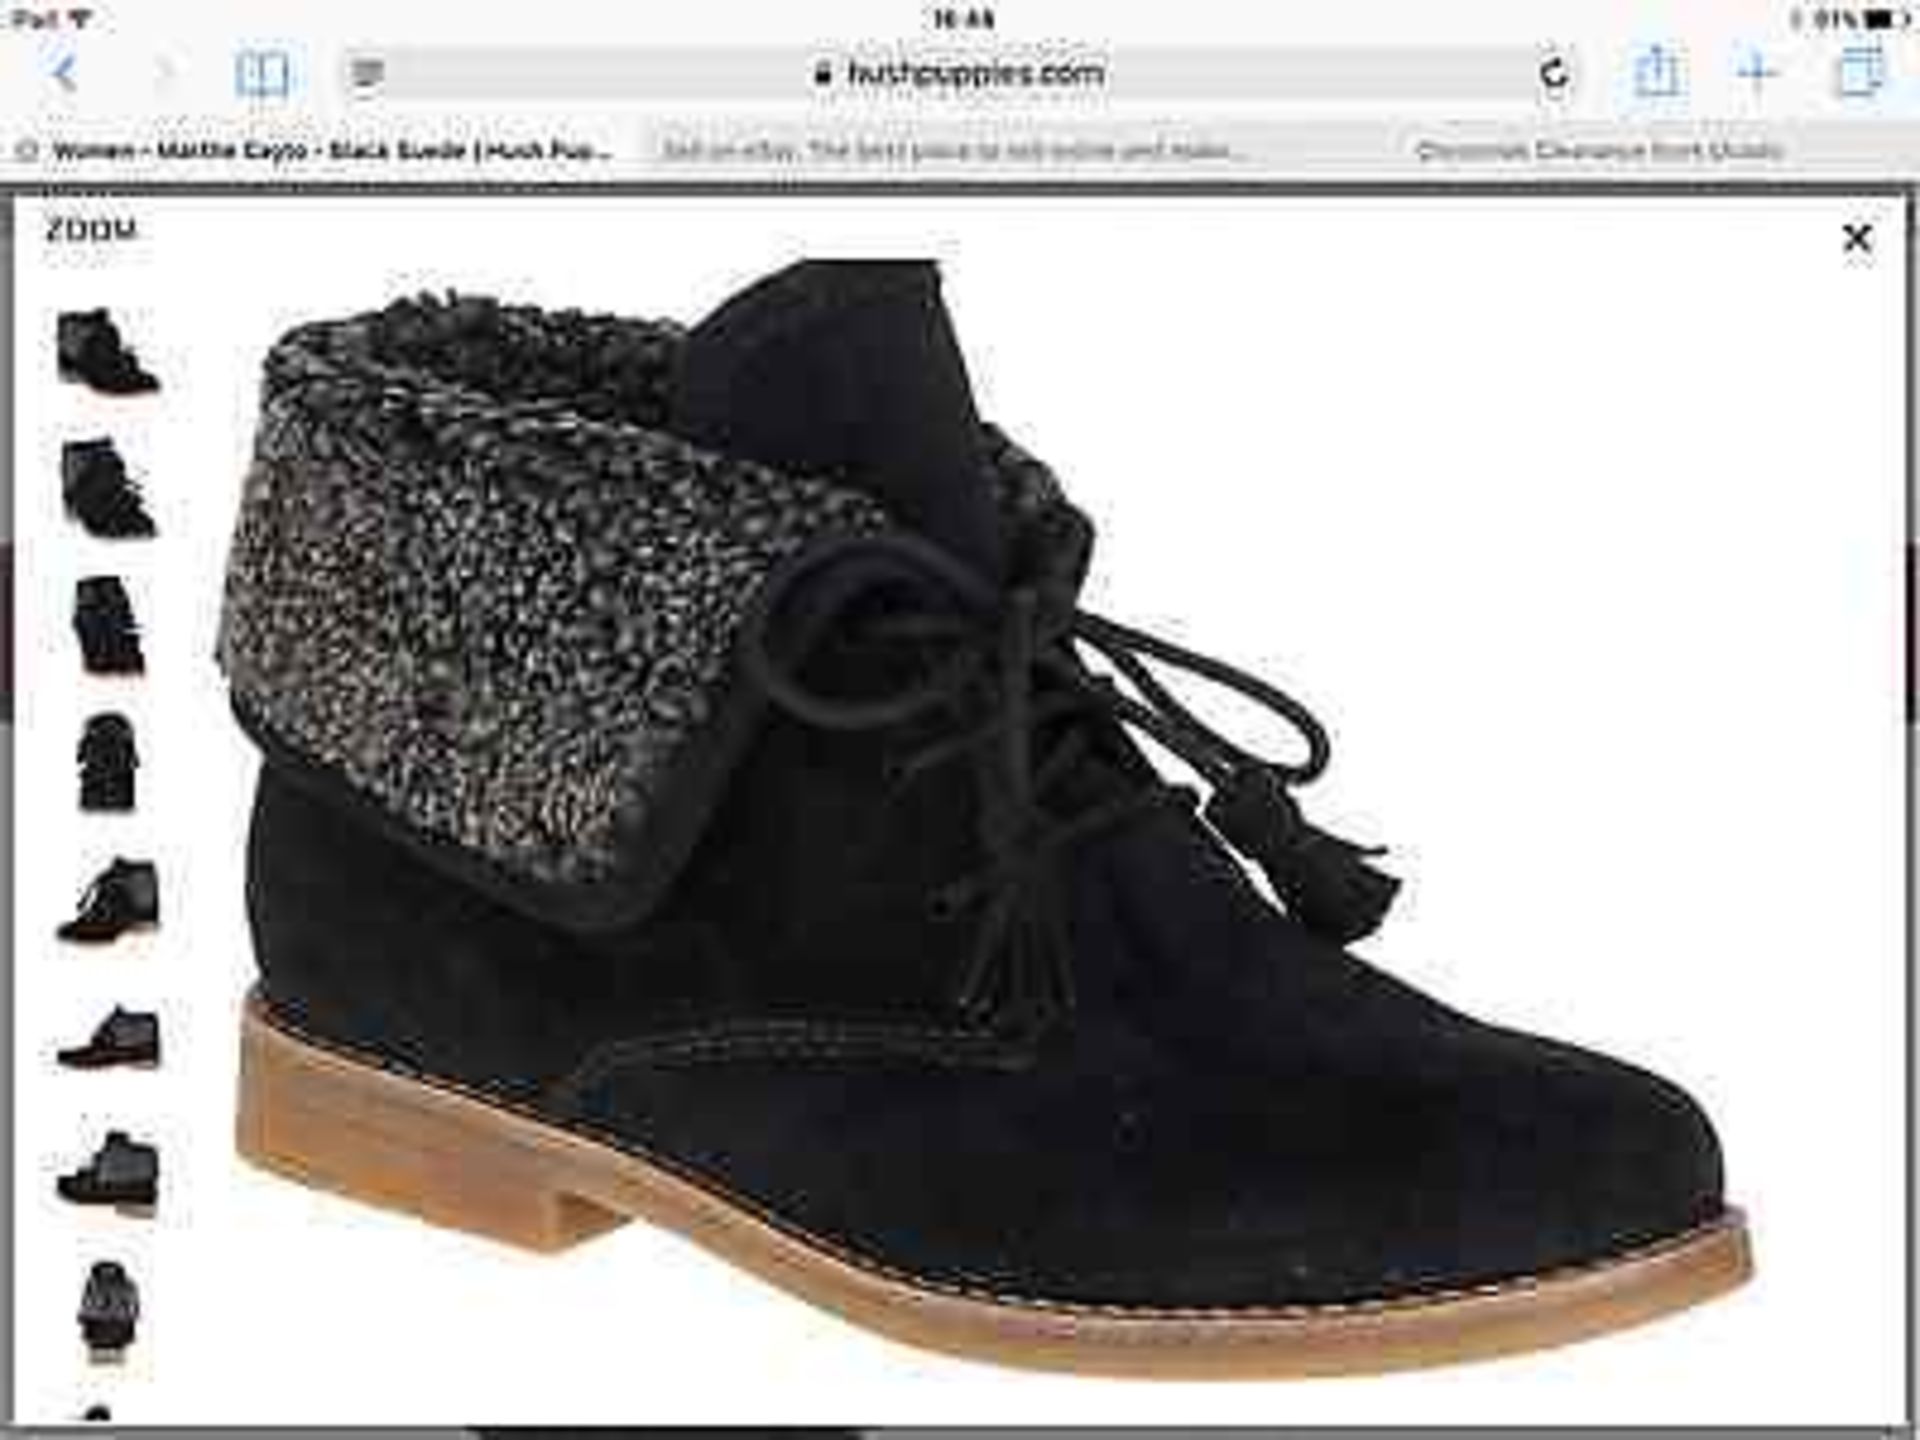 Hush Puppies Black Suede Martha Cayto Ankle Boot, Size UK 7, RRP £100 (New with box) - Image 4 of 12